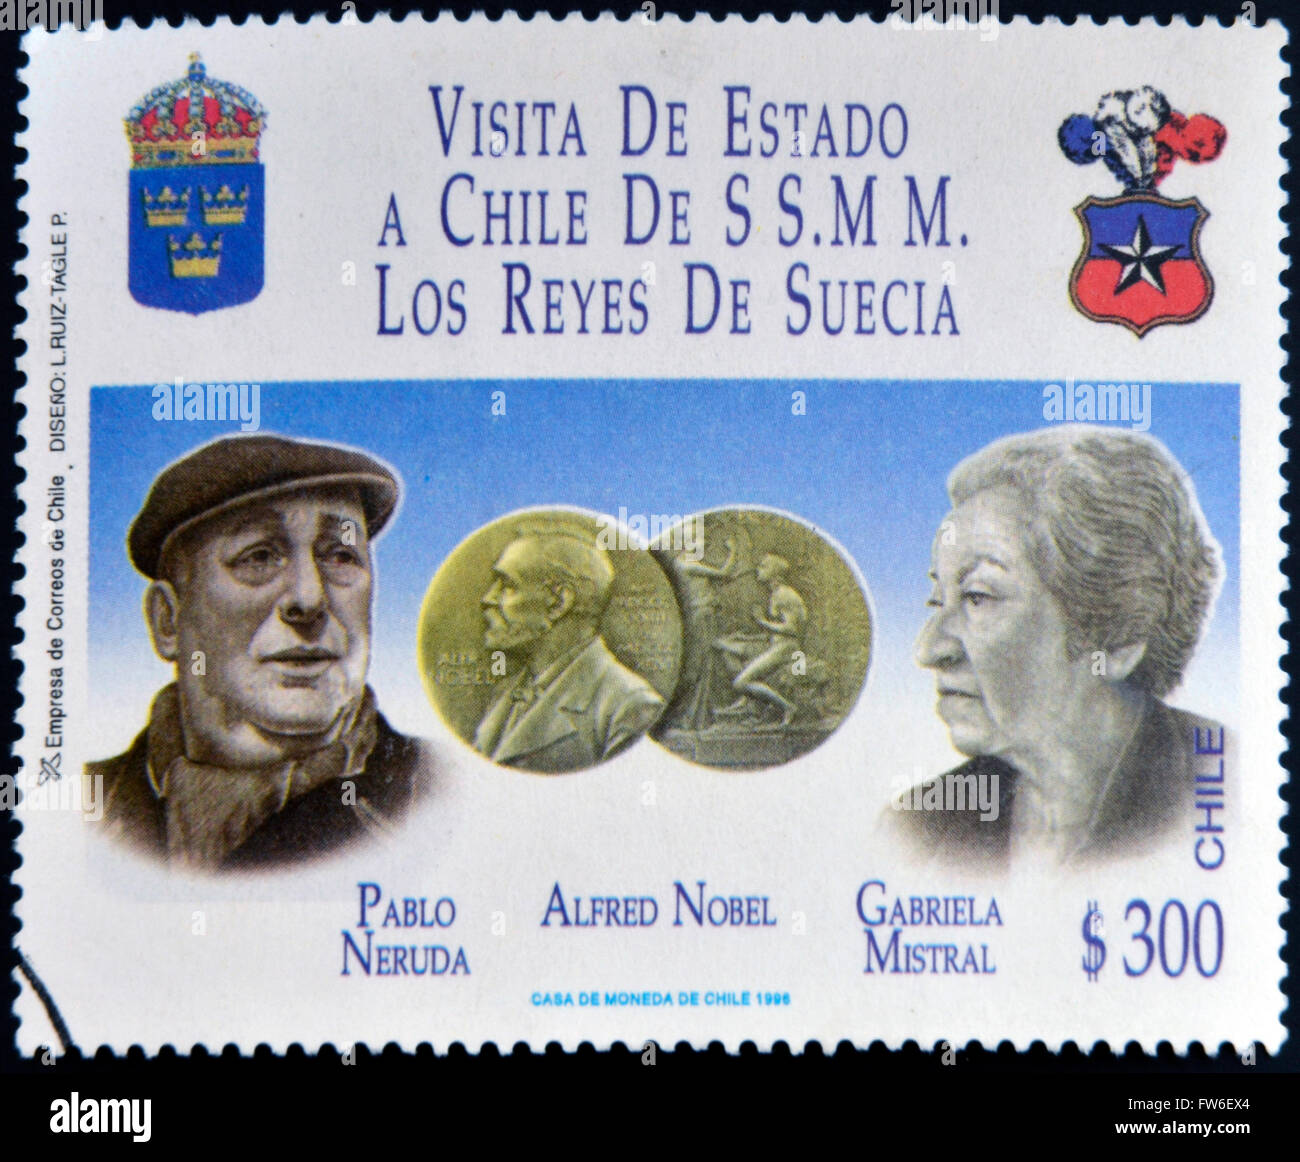 CHILE - CIRCA 1996: A stamp printed in Chile dedicated to visit of the kings of Sweden, shows Pablo Neruda and Gabriela Mistral, Stock Photo